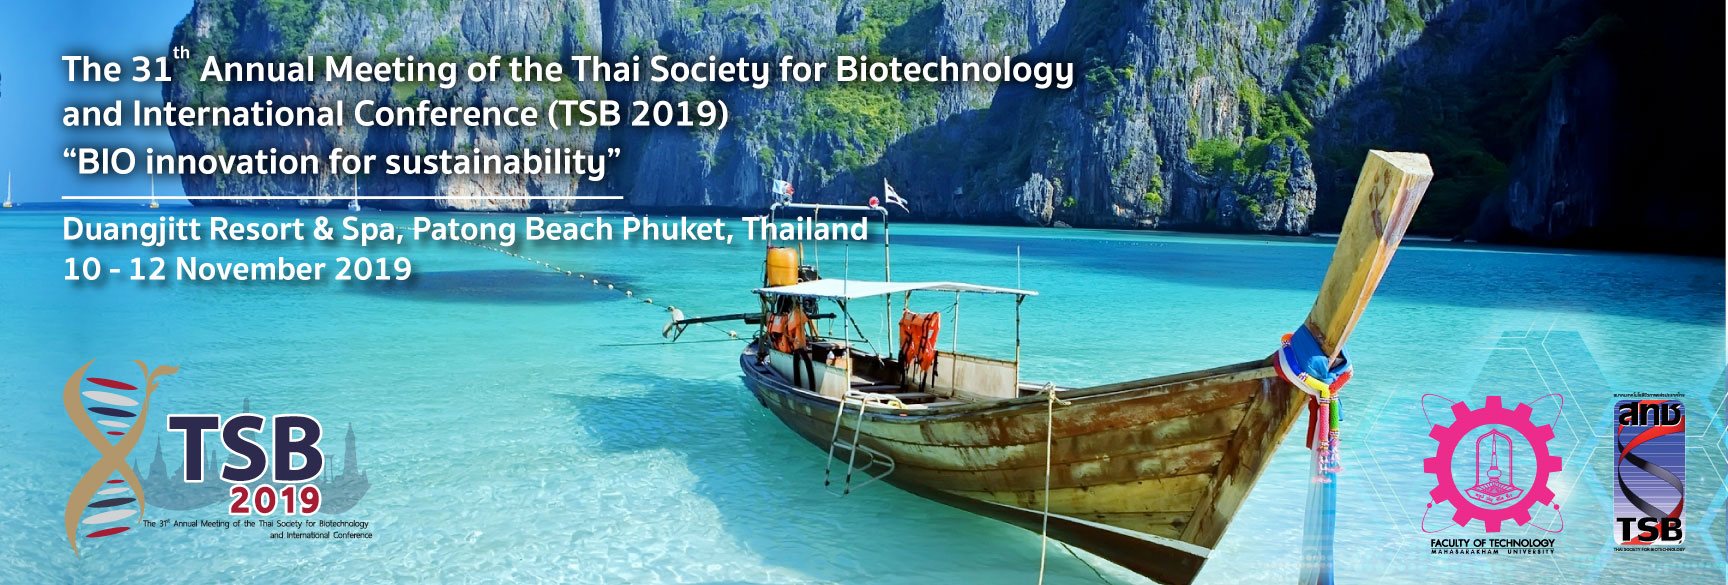 The 31 Annual Meeting of the Thai Society for Biotechnology and International Conference - Event Banner